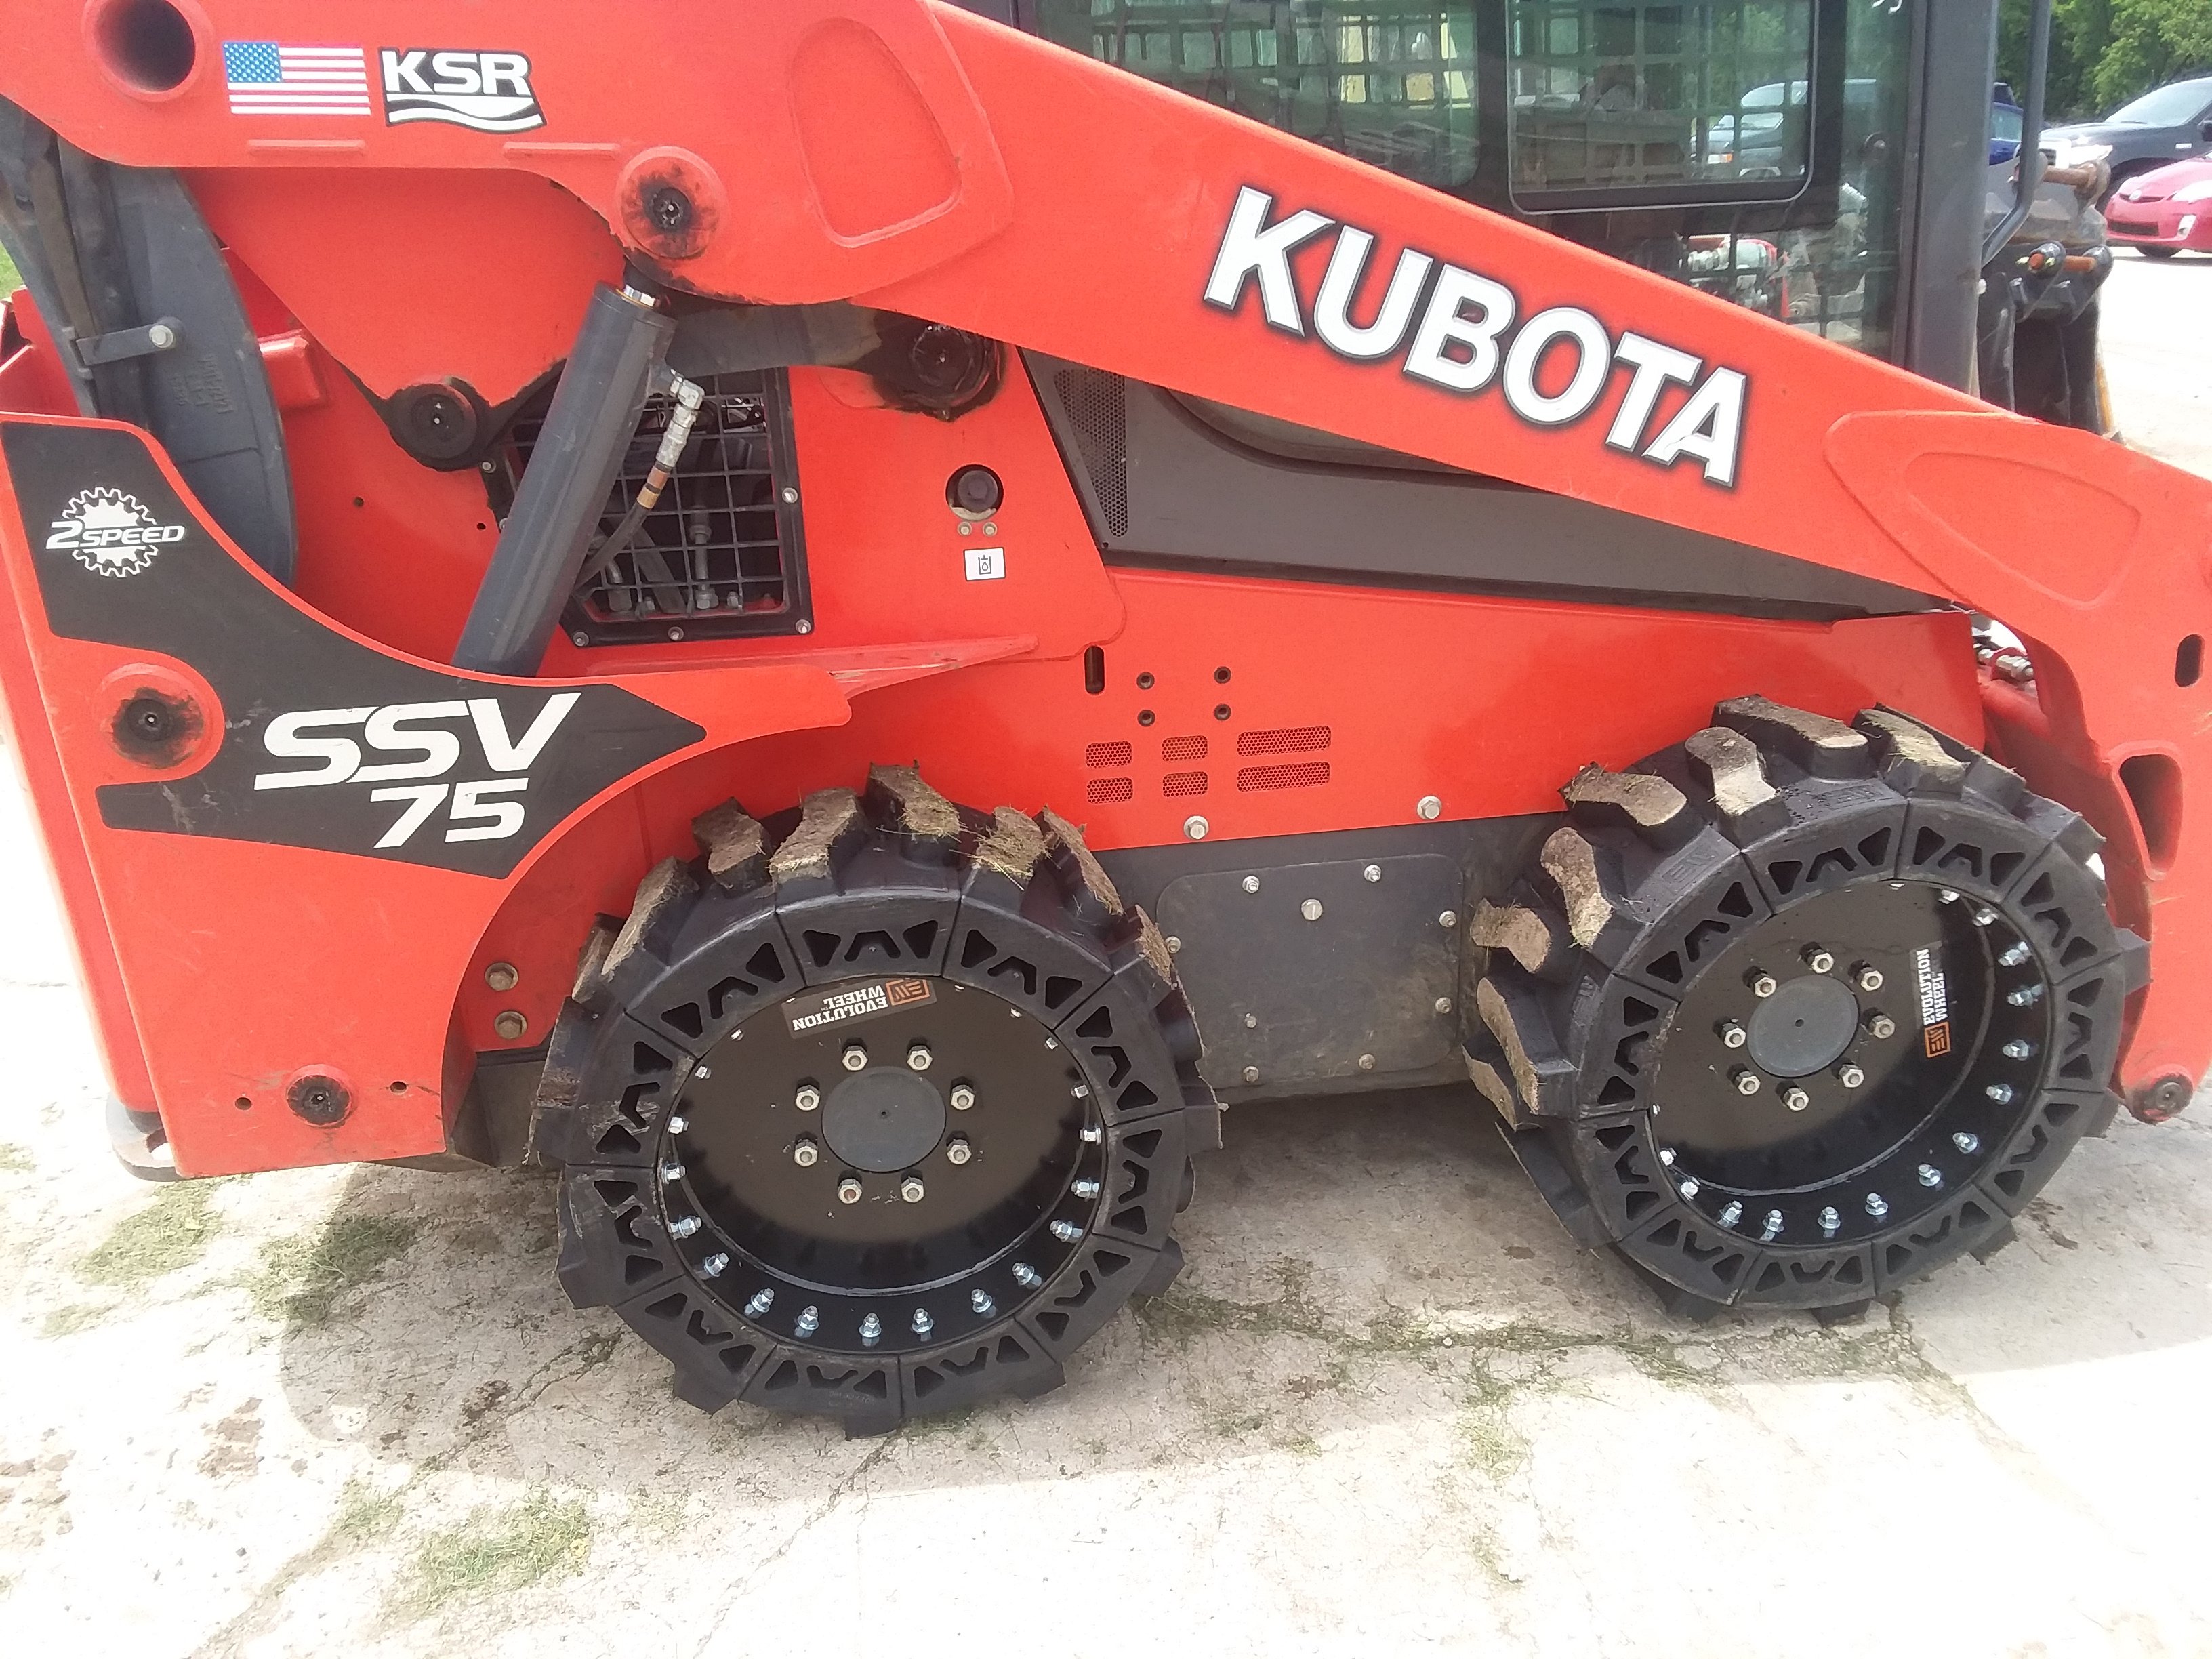 This images shows a red Kubota skid steer using our 12x16 5 Bobcat Tires